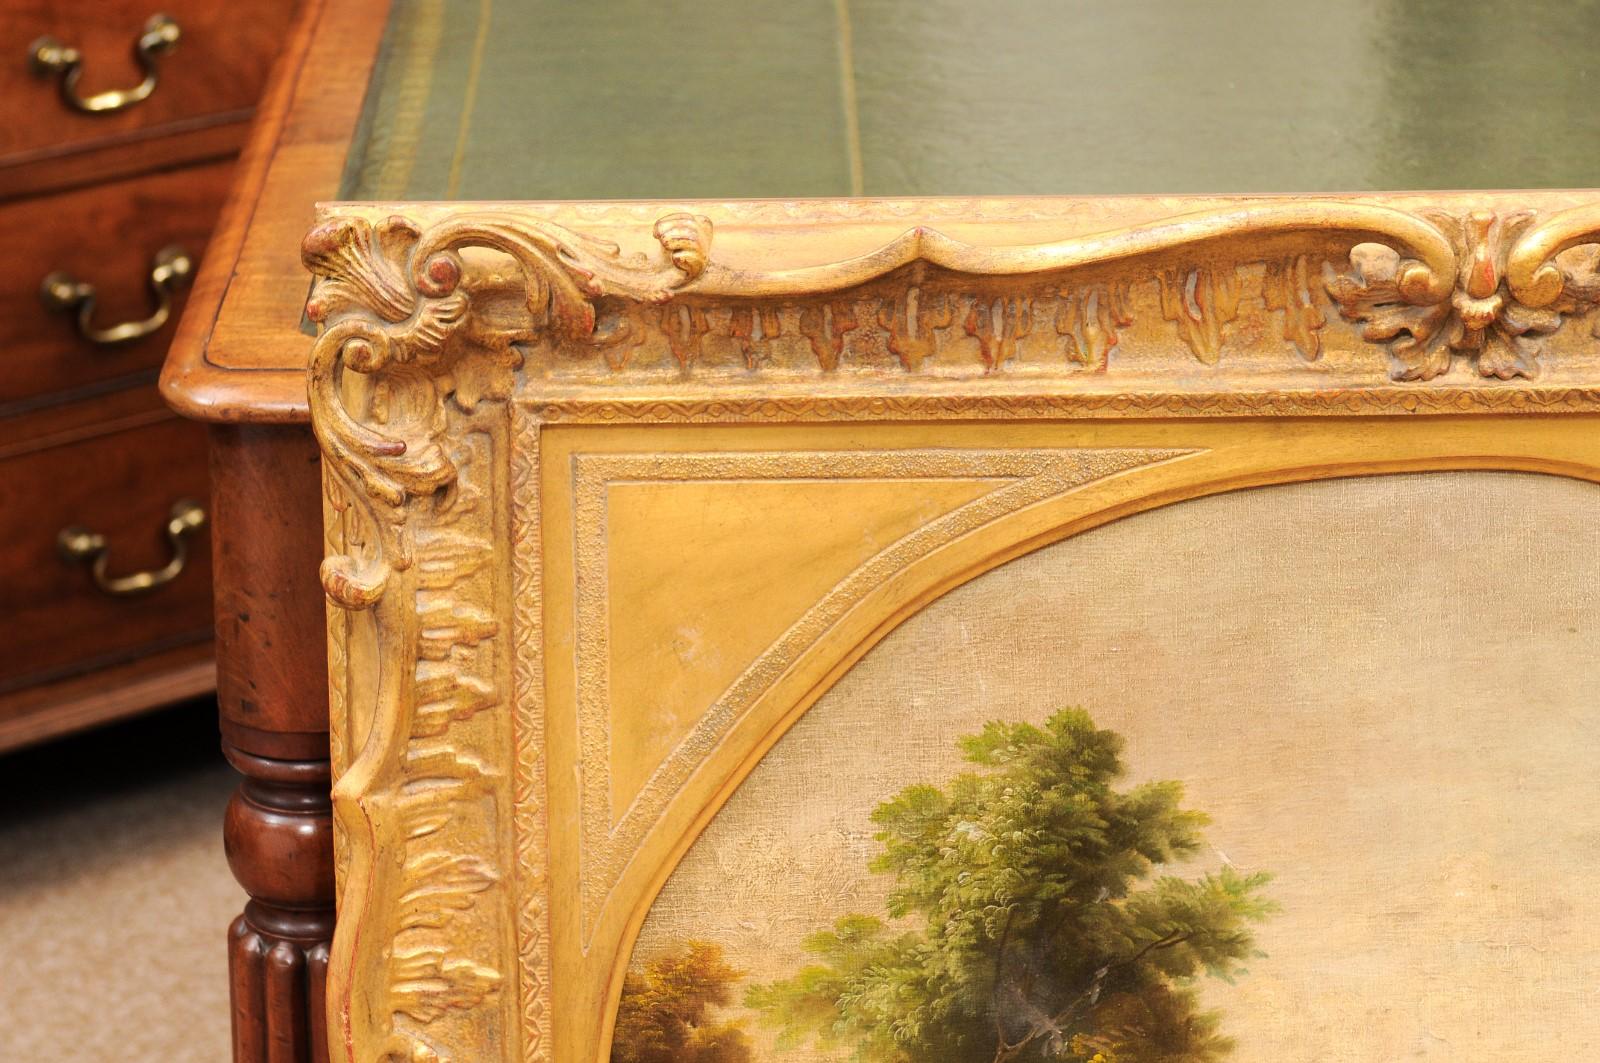 Large 19th Century English Oil on Canvas Landscape Painting in Gilt Frame For Sale 2